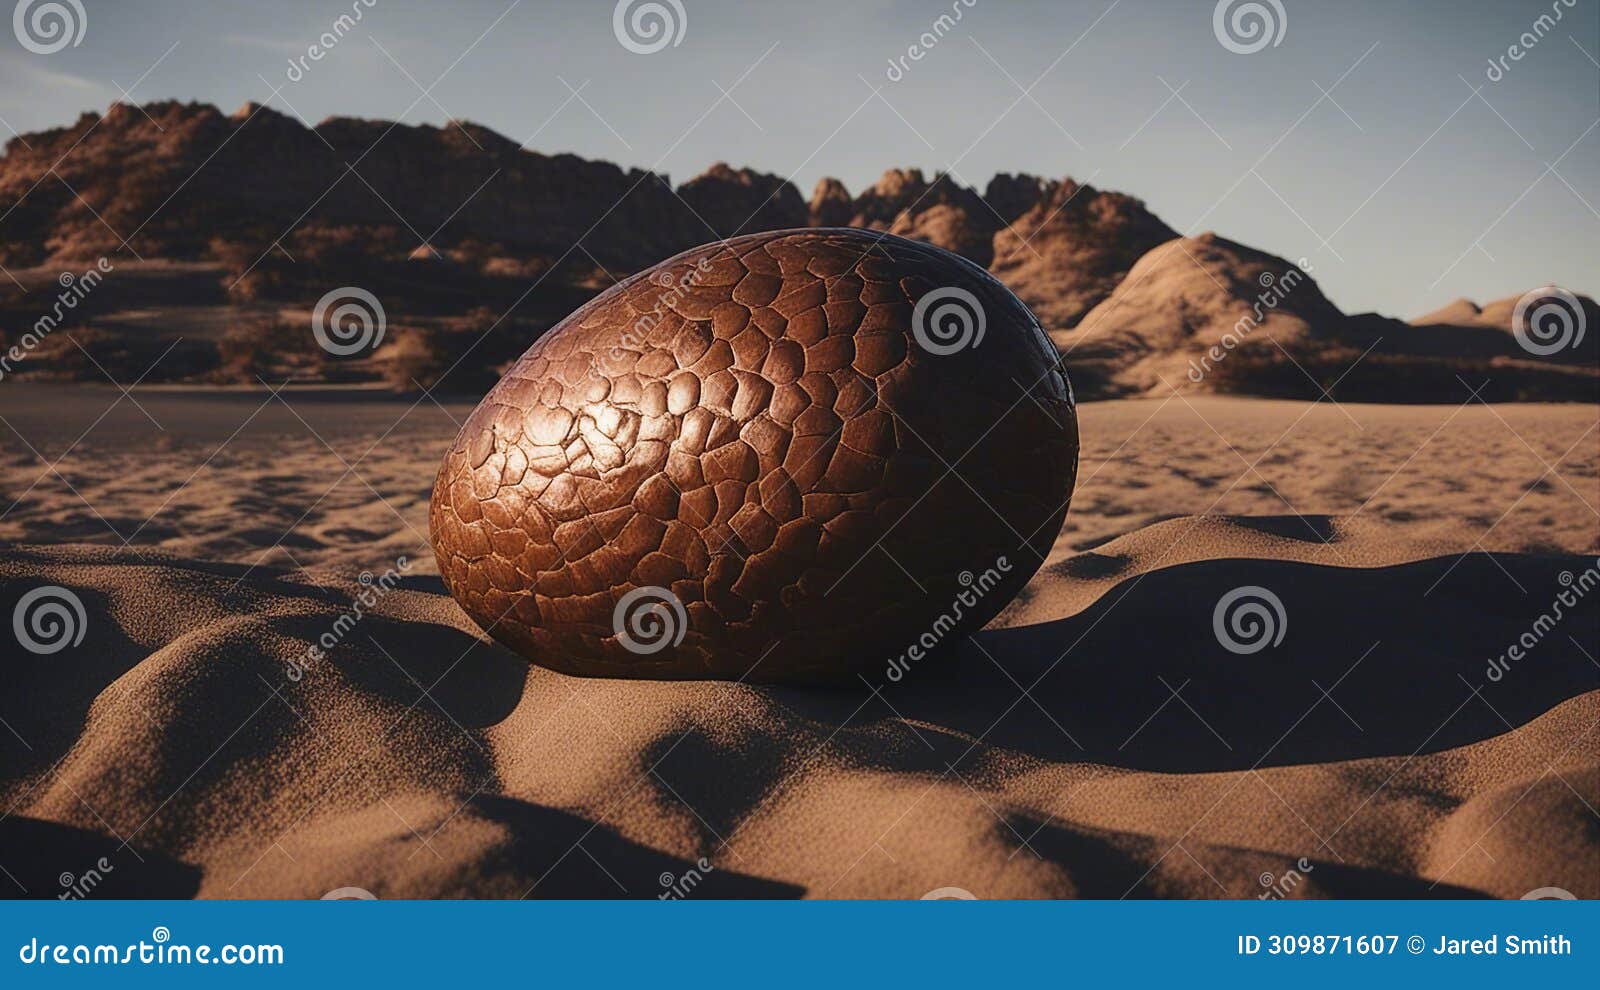 in the desert _the dinosaur egg was a phony. it pretended to be real and cool and badass,